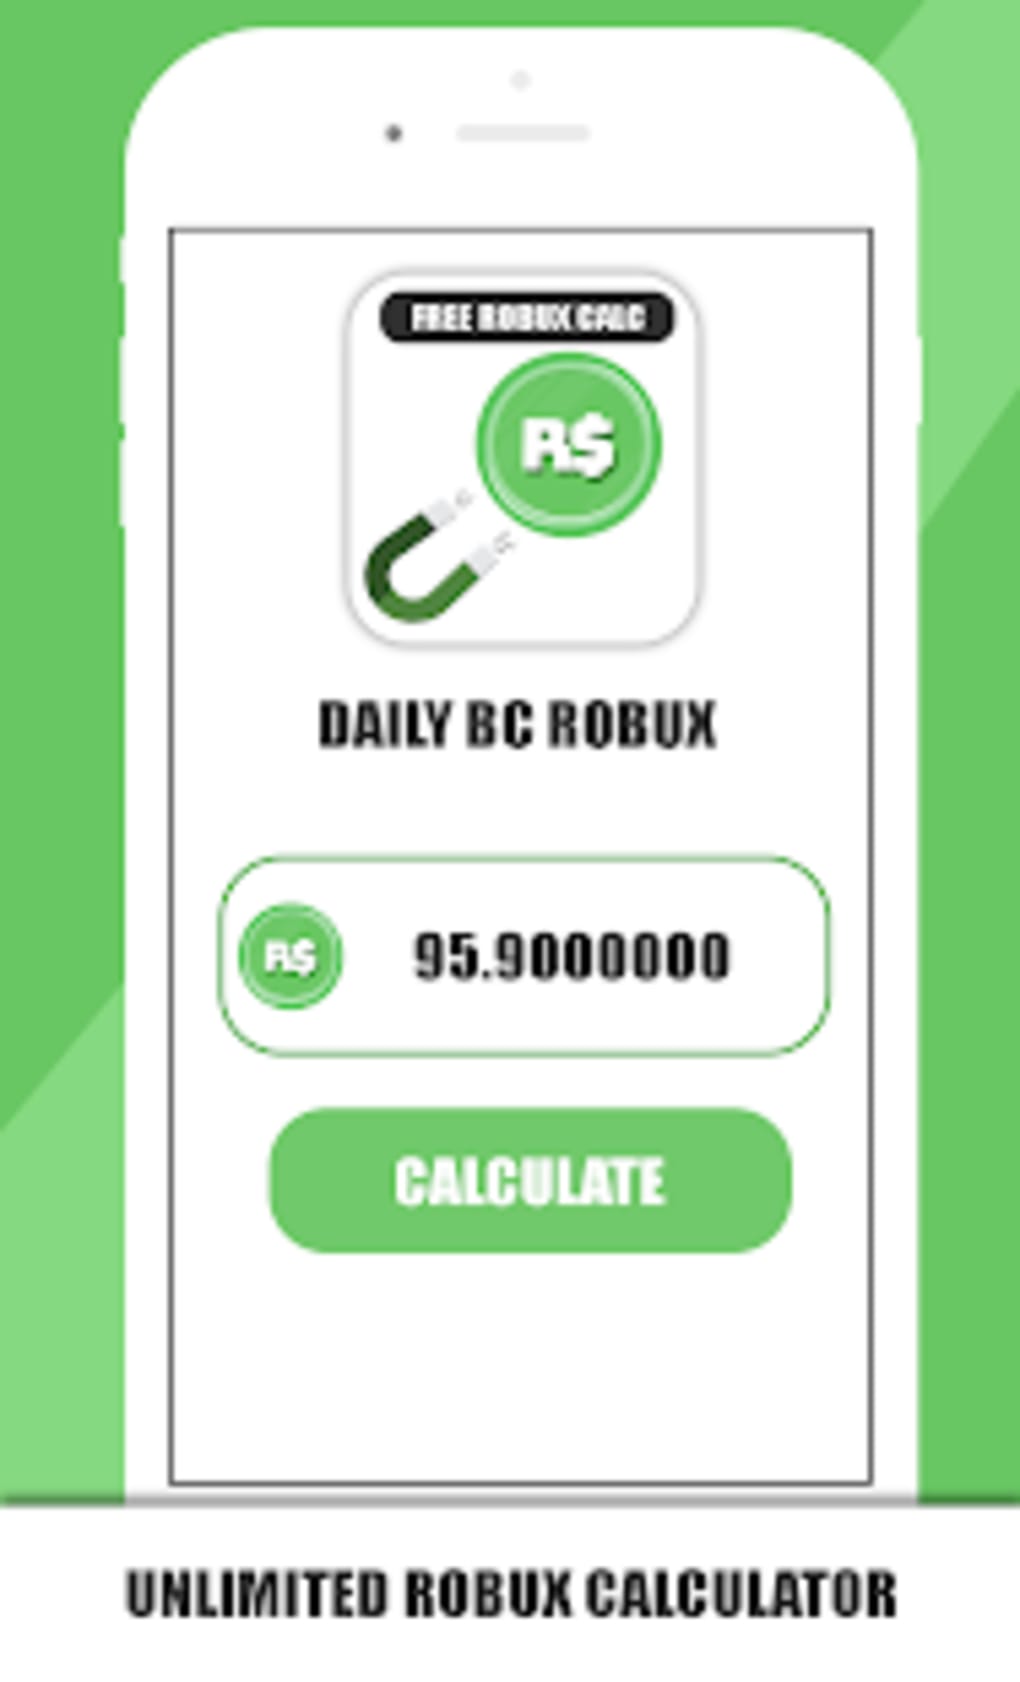 Free Robux Calc And Quizz For Roblox 2019 Apps En Google - free robux calc for roblox 2020 apk app free download for android